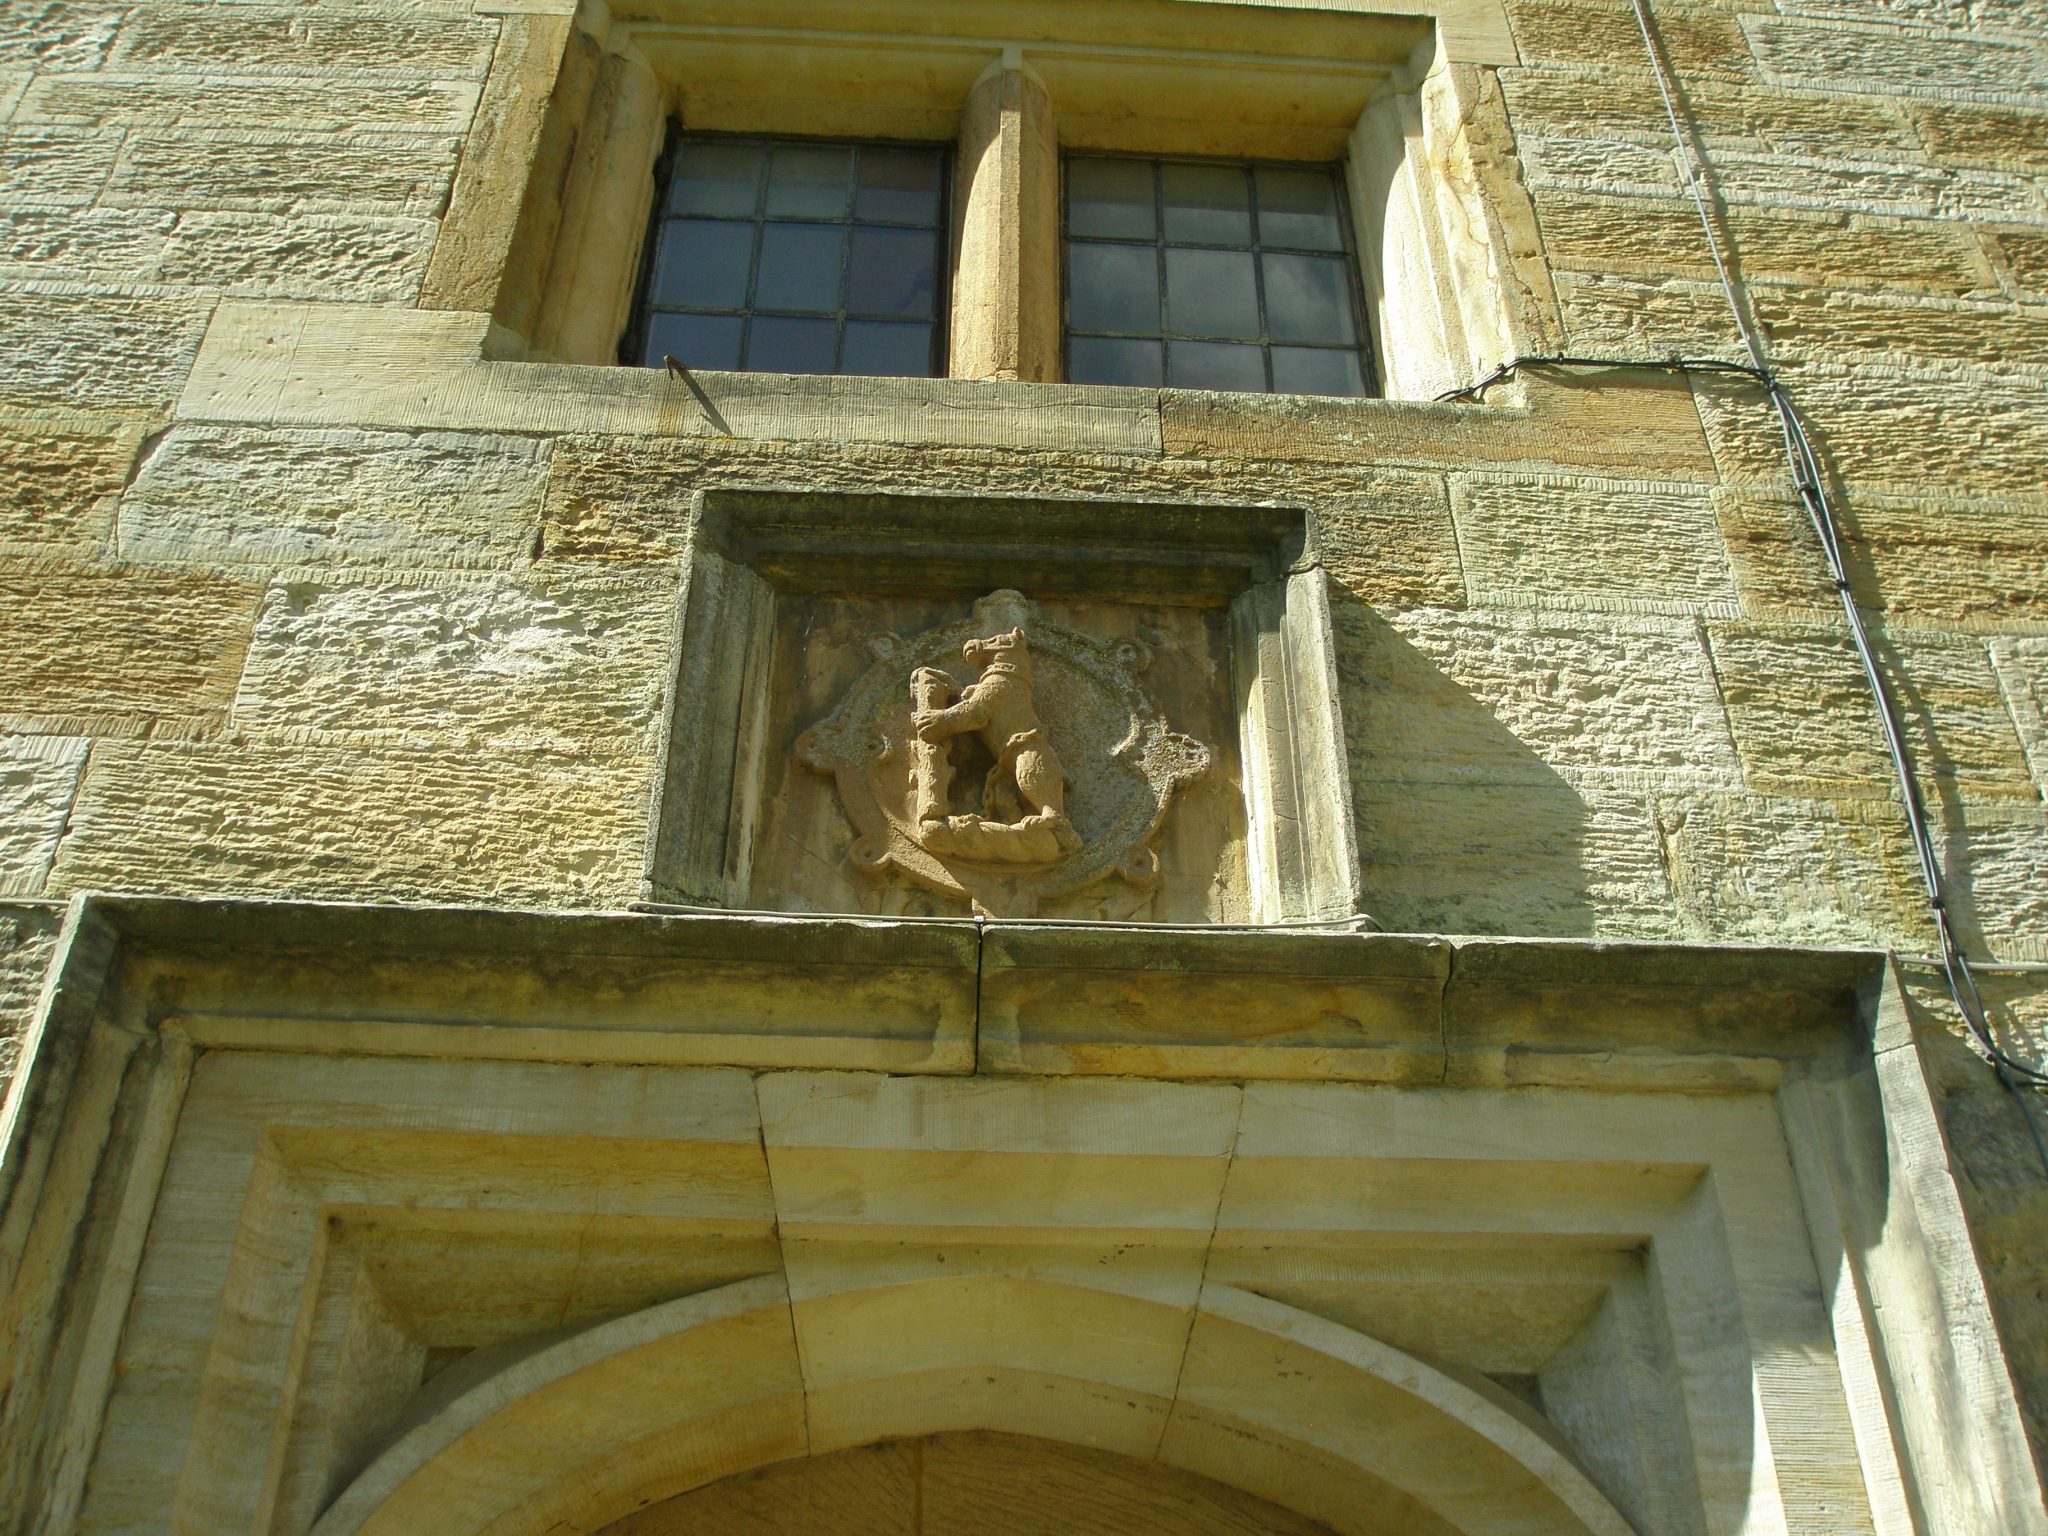 Another Dudley family Bear With Ragged Staff, this one carved atop a doorway.